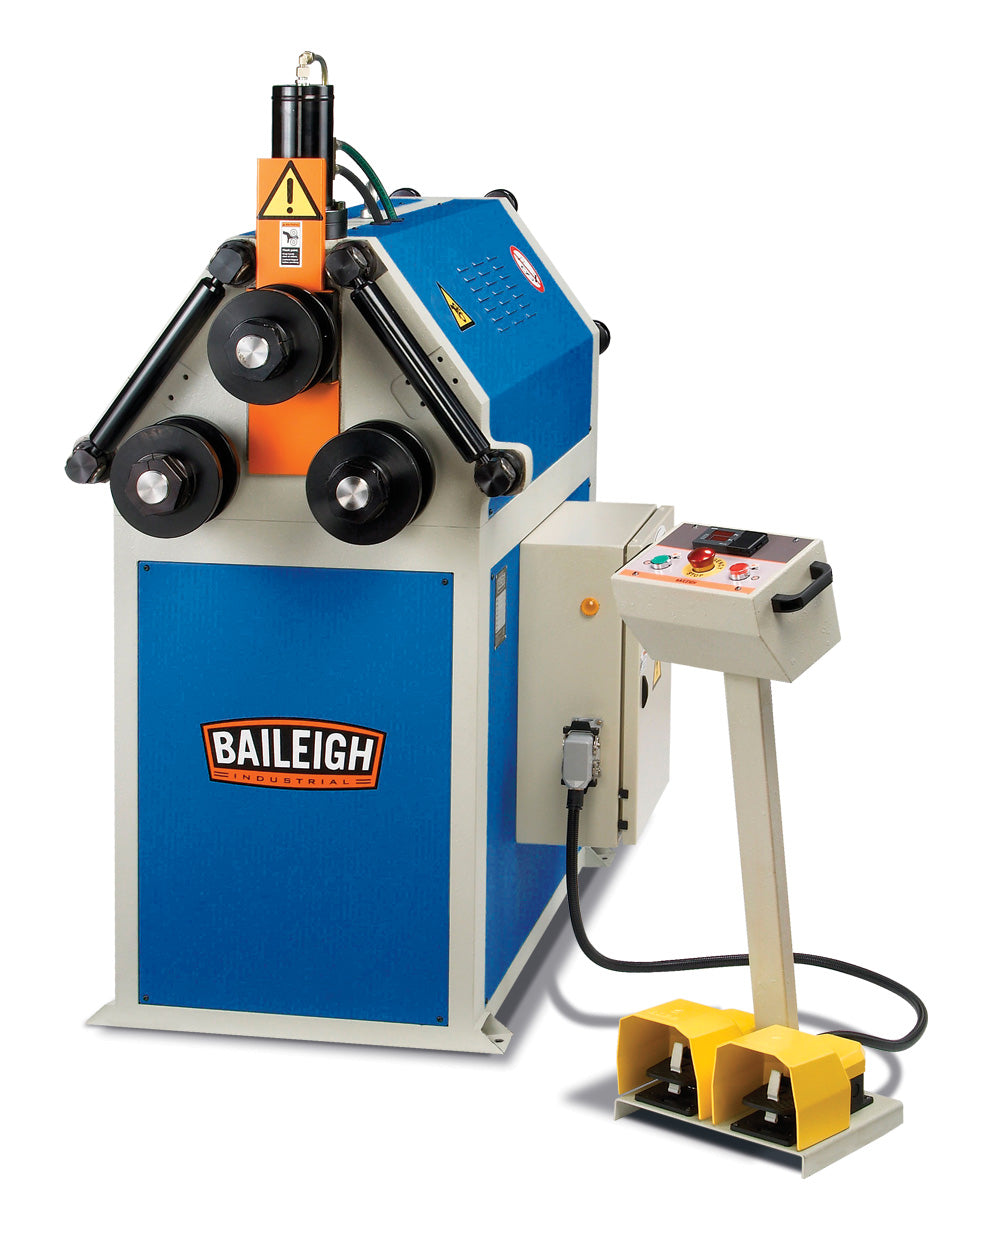 Baileigh R-H55 220V 3 Phase Roll Bender with Hydraulic Movement of the Top Roll